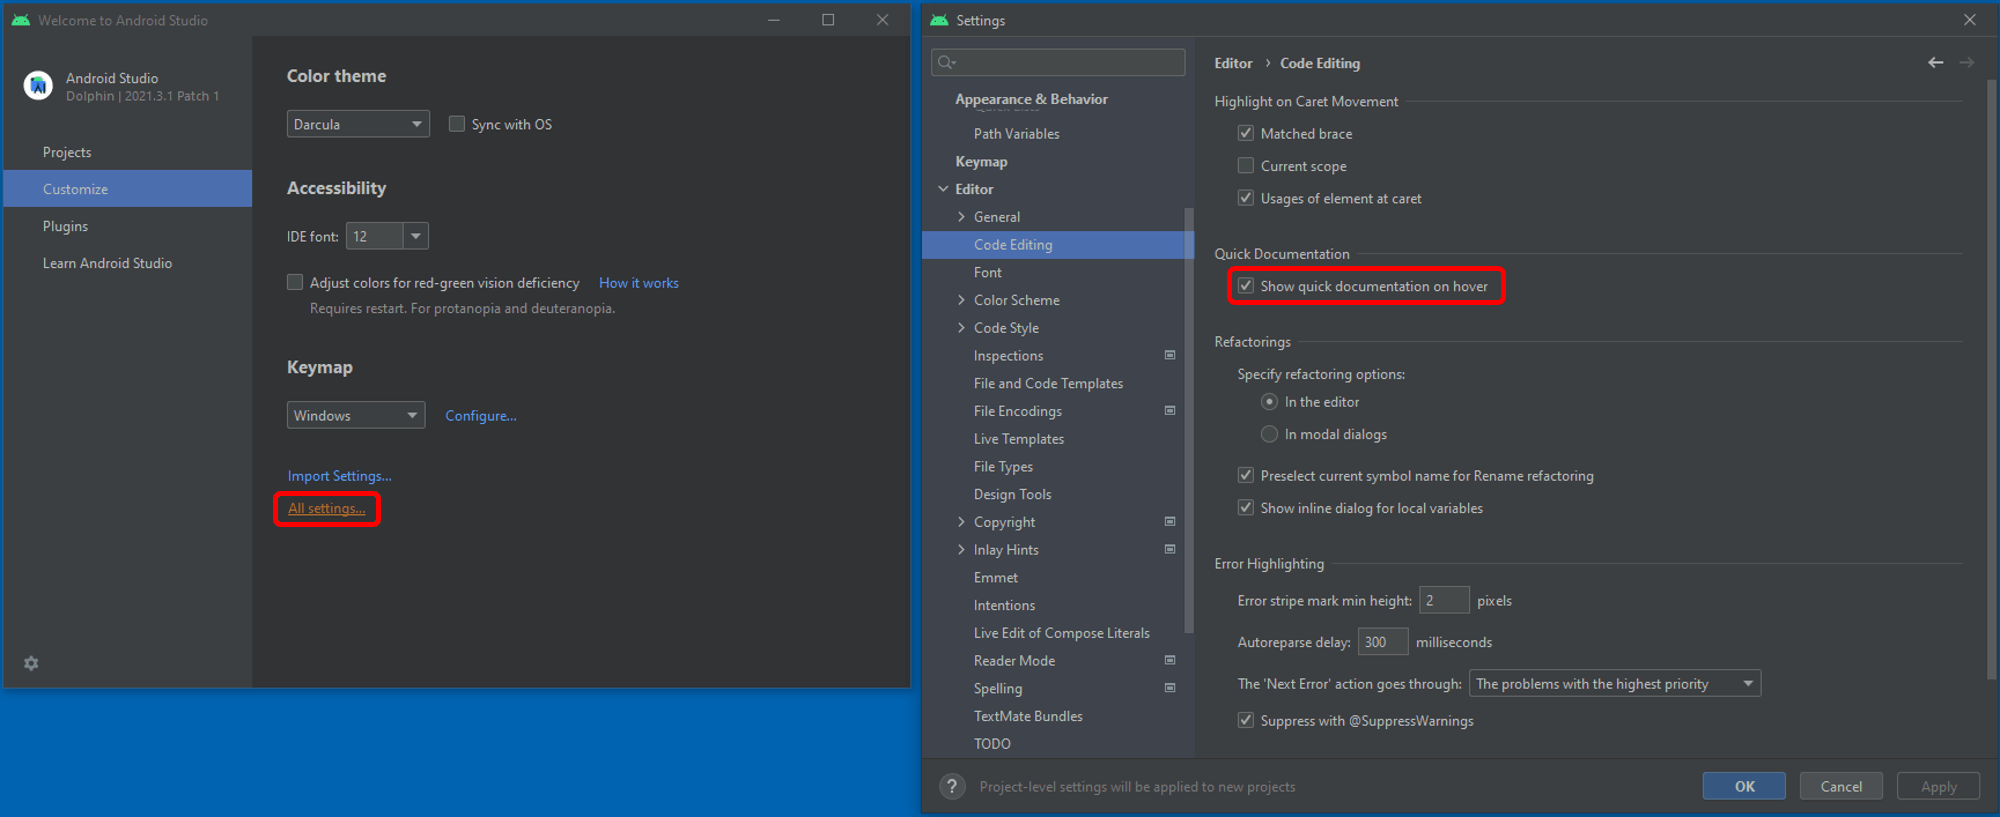 Android Studio quick docs on hover setting from home page - hugo